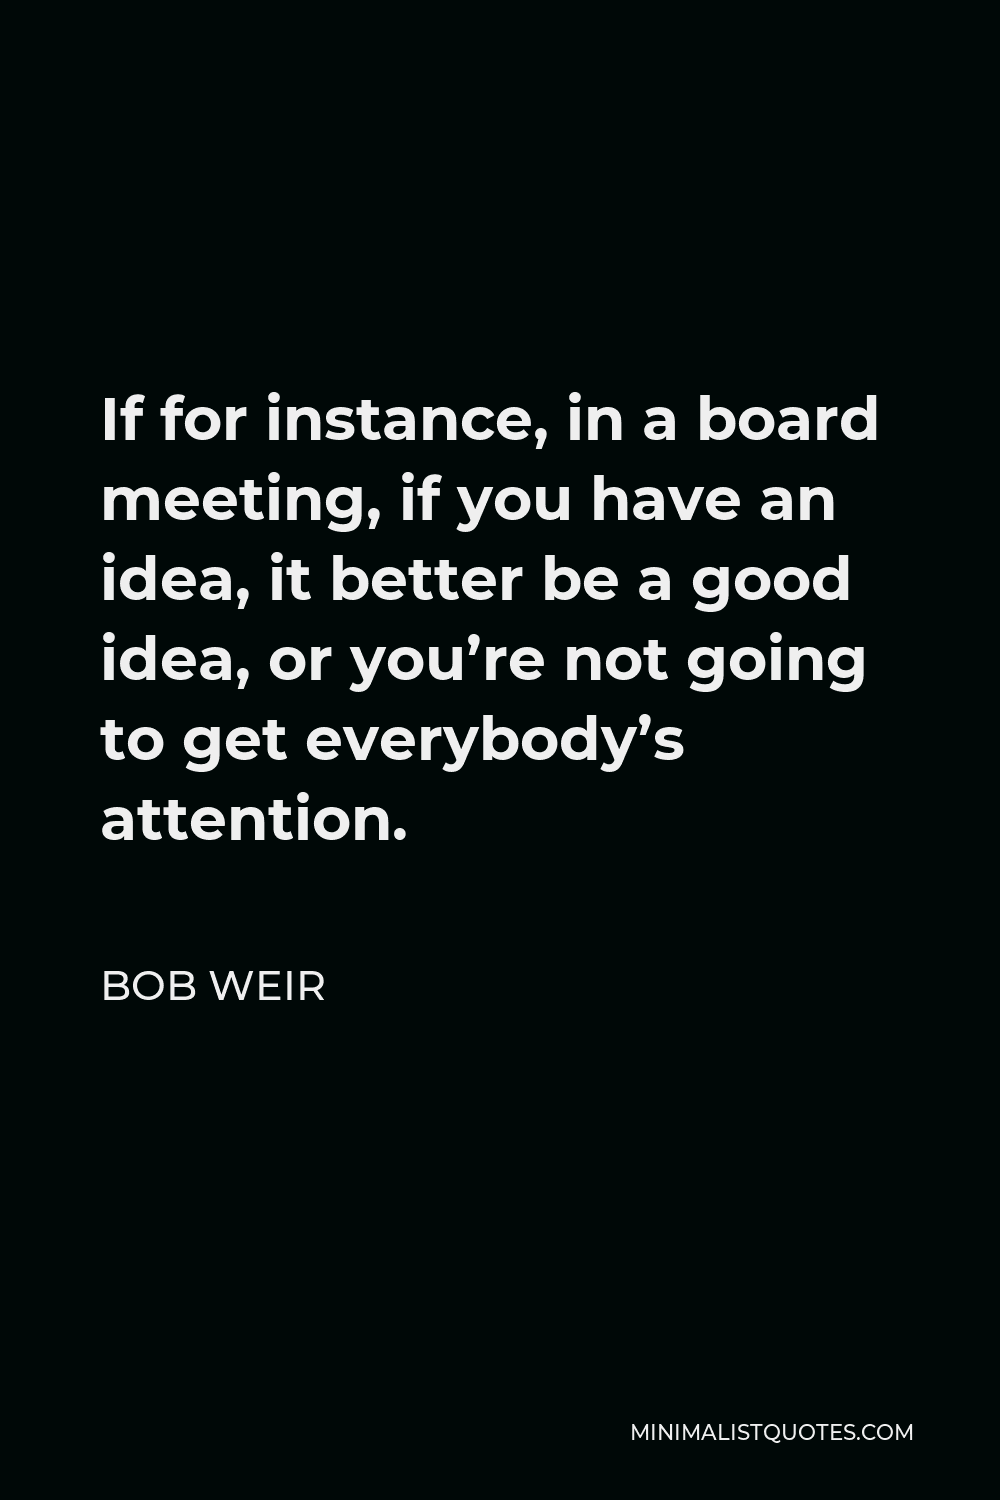 Bob Weir Quote - If for instance, in a board meeting, if you have an idea, it better be a good idea, or you’re not going to get everybody’s attention.